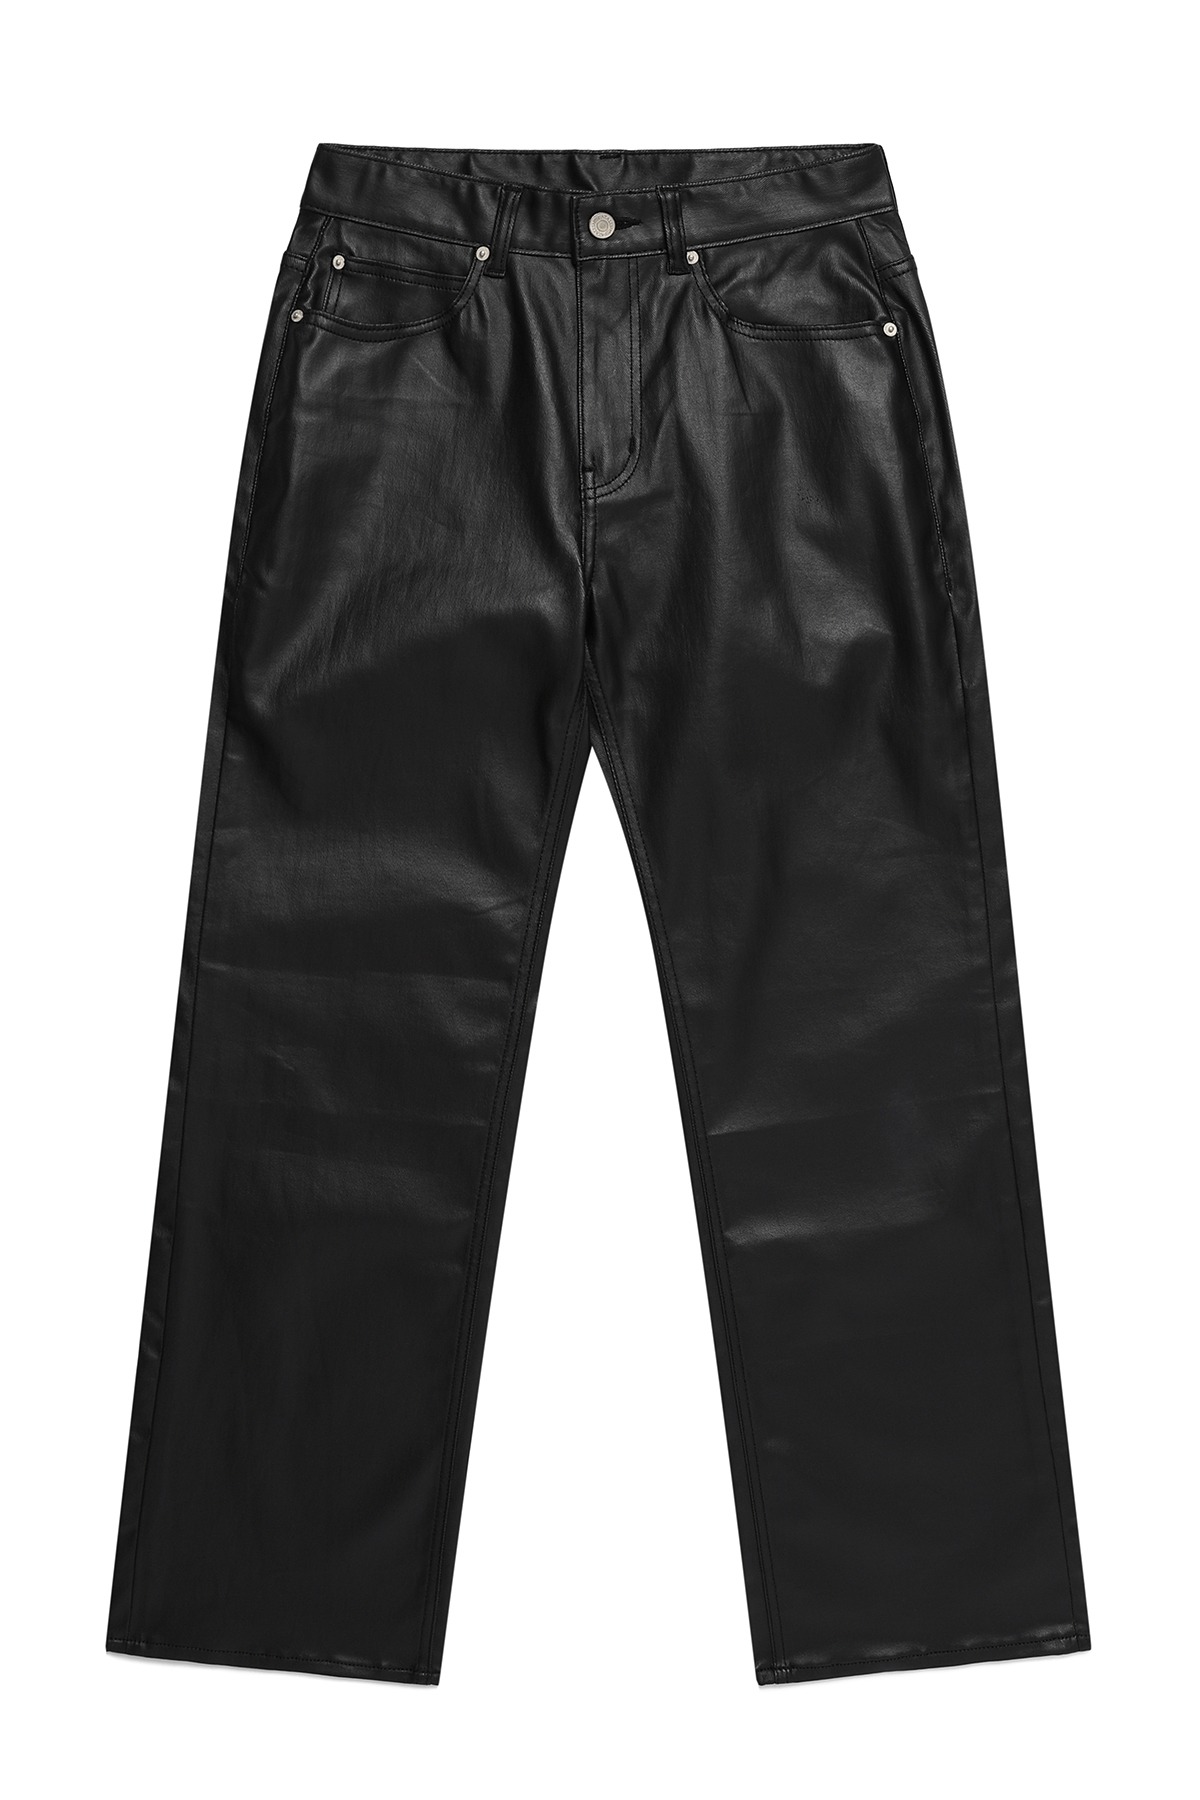 #0336 Eco Carbon coated wide jeans